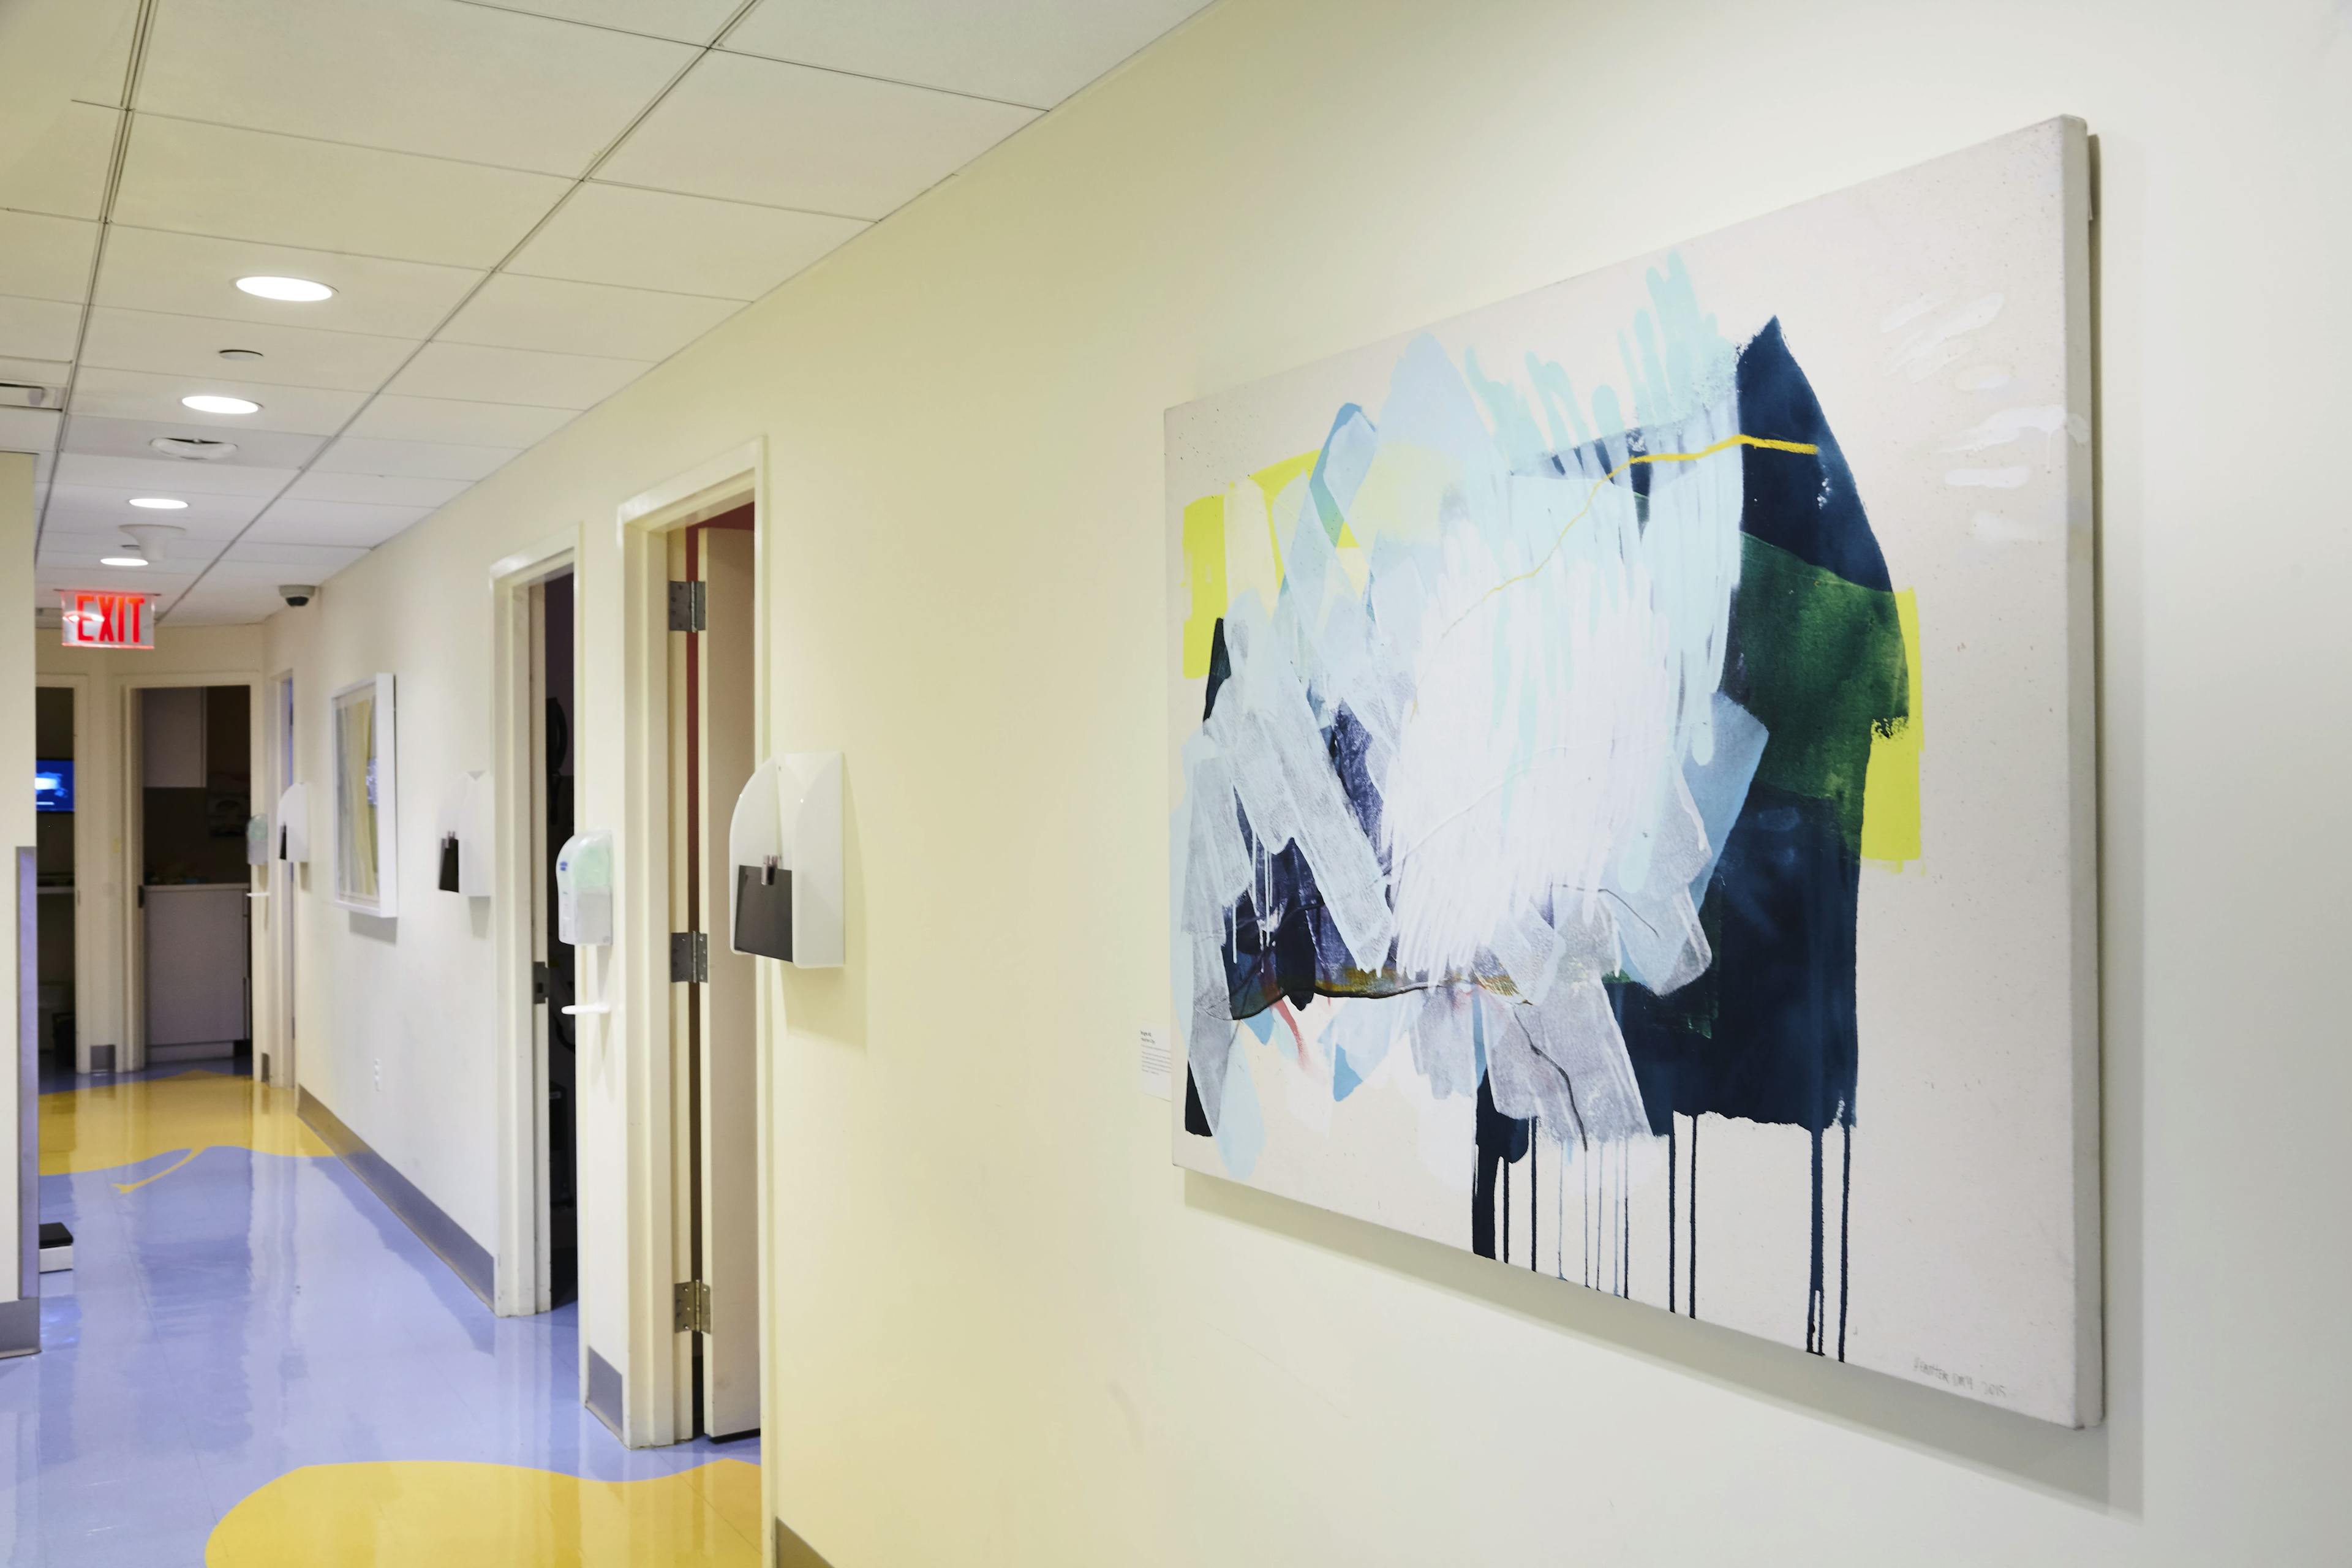 Abstract gestural painting on canvas installed on a beige wall in a hospital corridor.